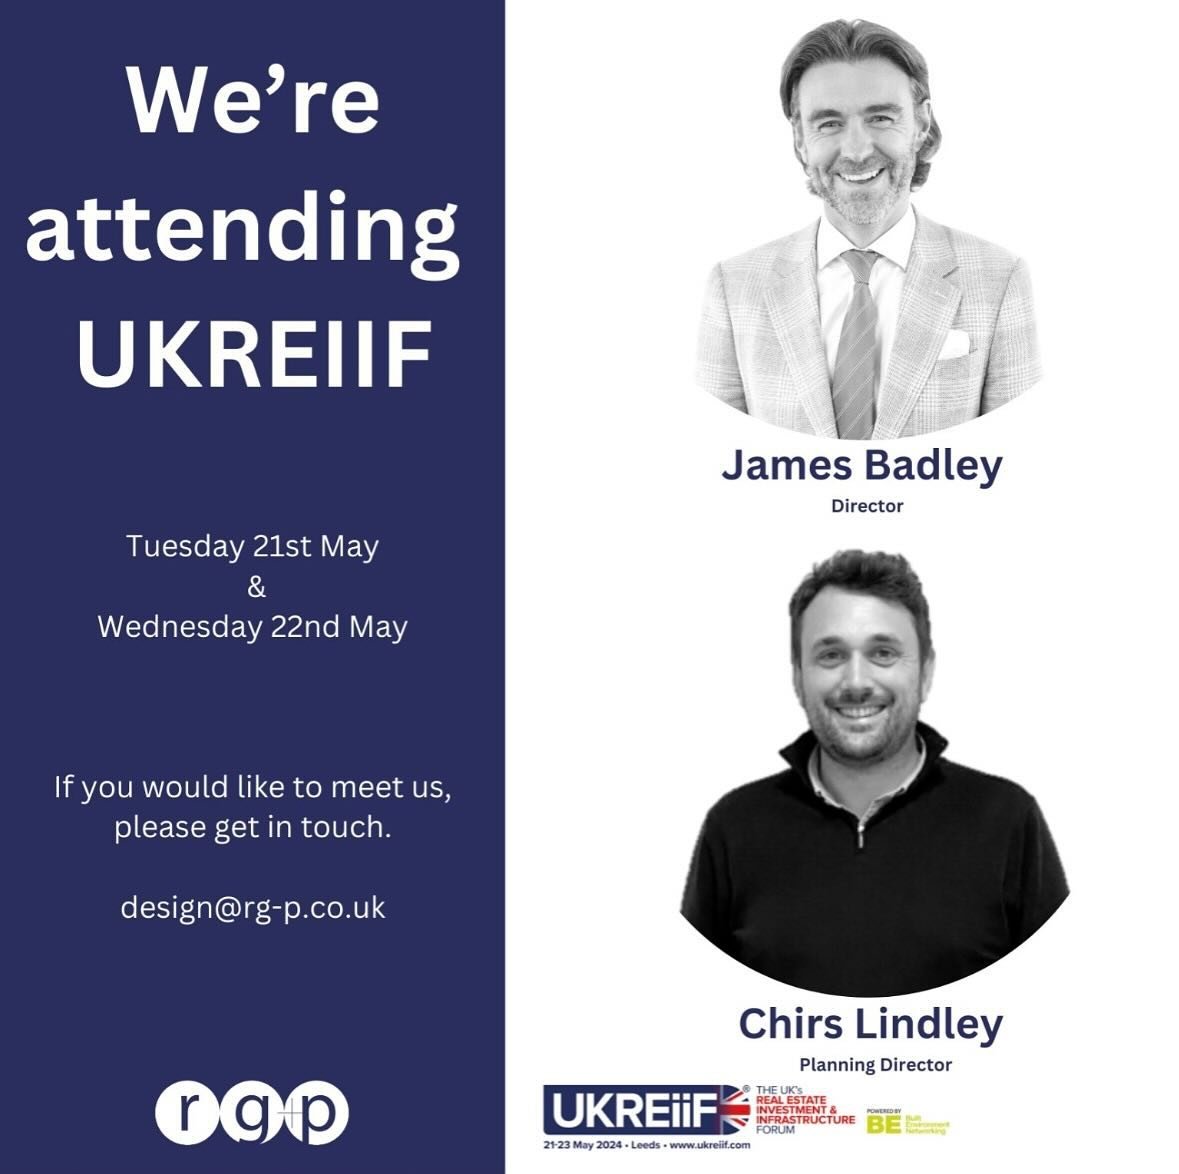 Are you going to UKREiiF? rg+p will be there 👋 

Directors James Badley and Christopher Lindley are attending the Real Estate conference in Leeds in just over a weeks time.

Chris Lindley will be speaking at the &lsquo;Creating award winning spaces 